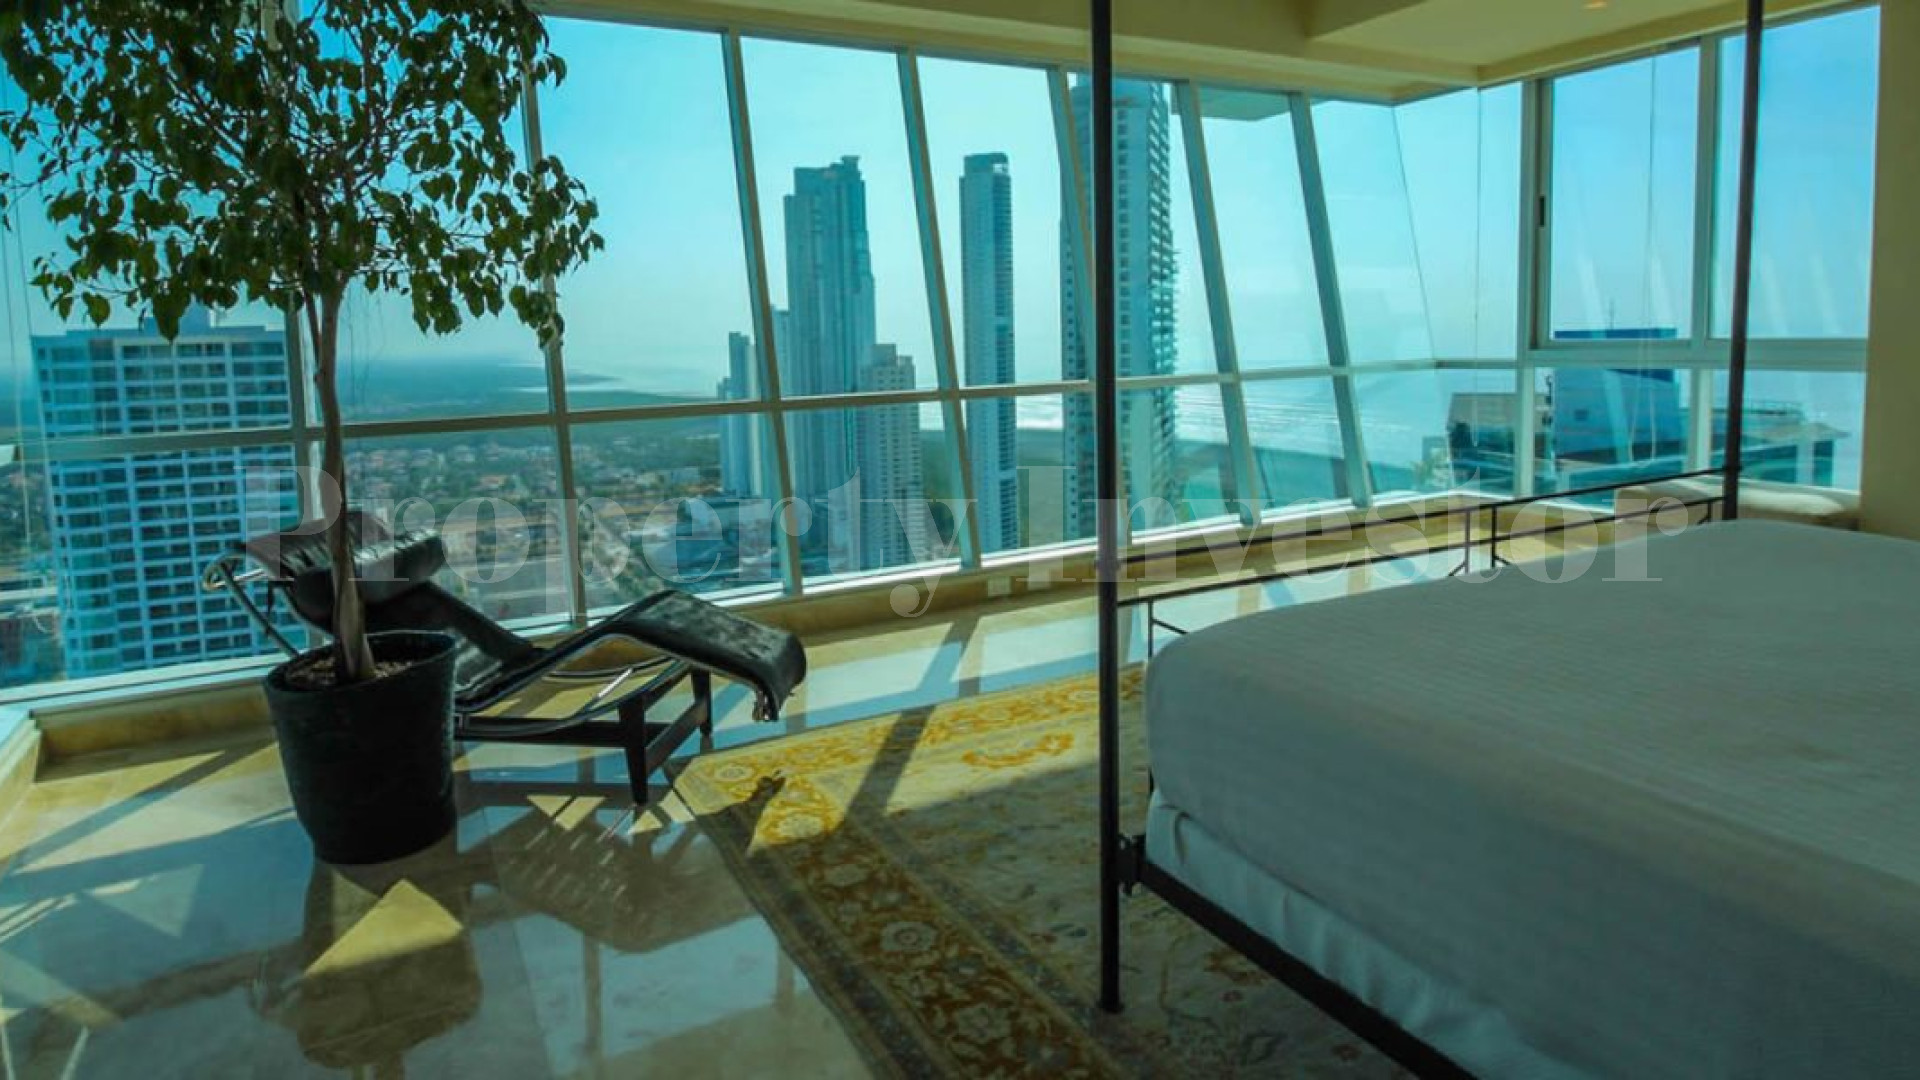 Impressive 4 Bedroom Three-Storey Oceanview Penthouse with Rooftop Pool & Terrace for Sale in Panama City, Panama